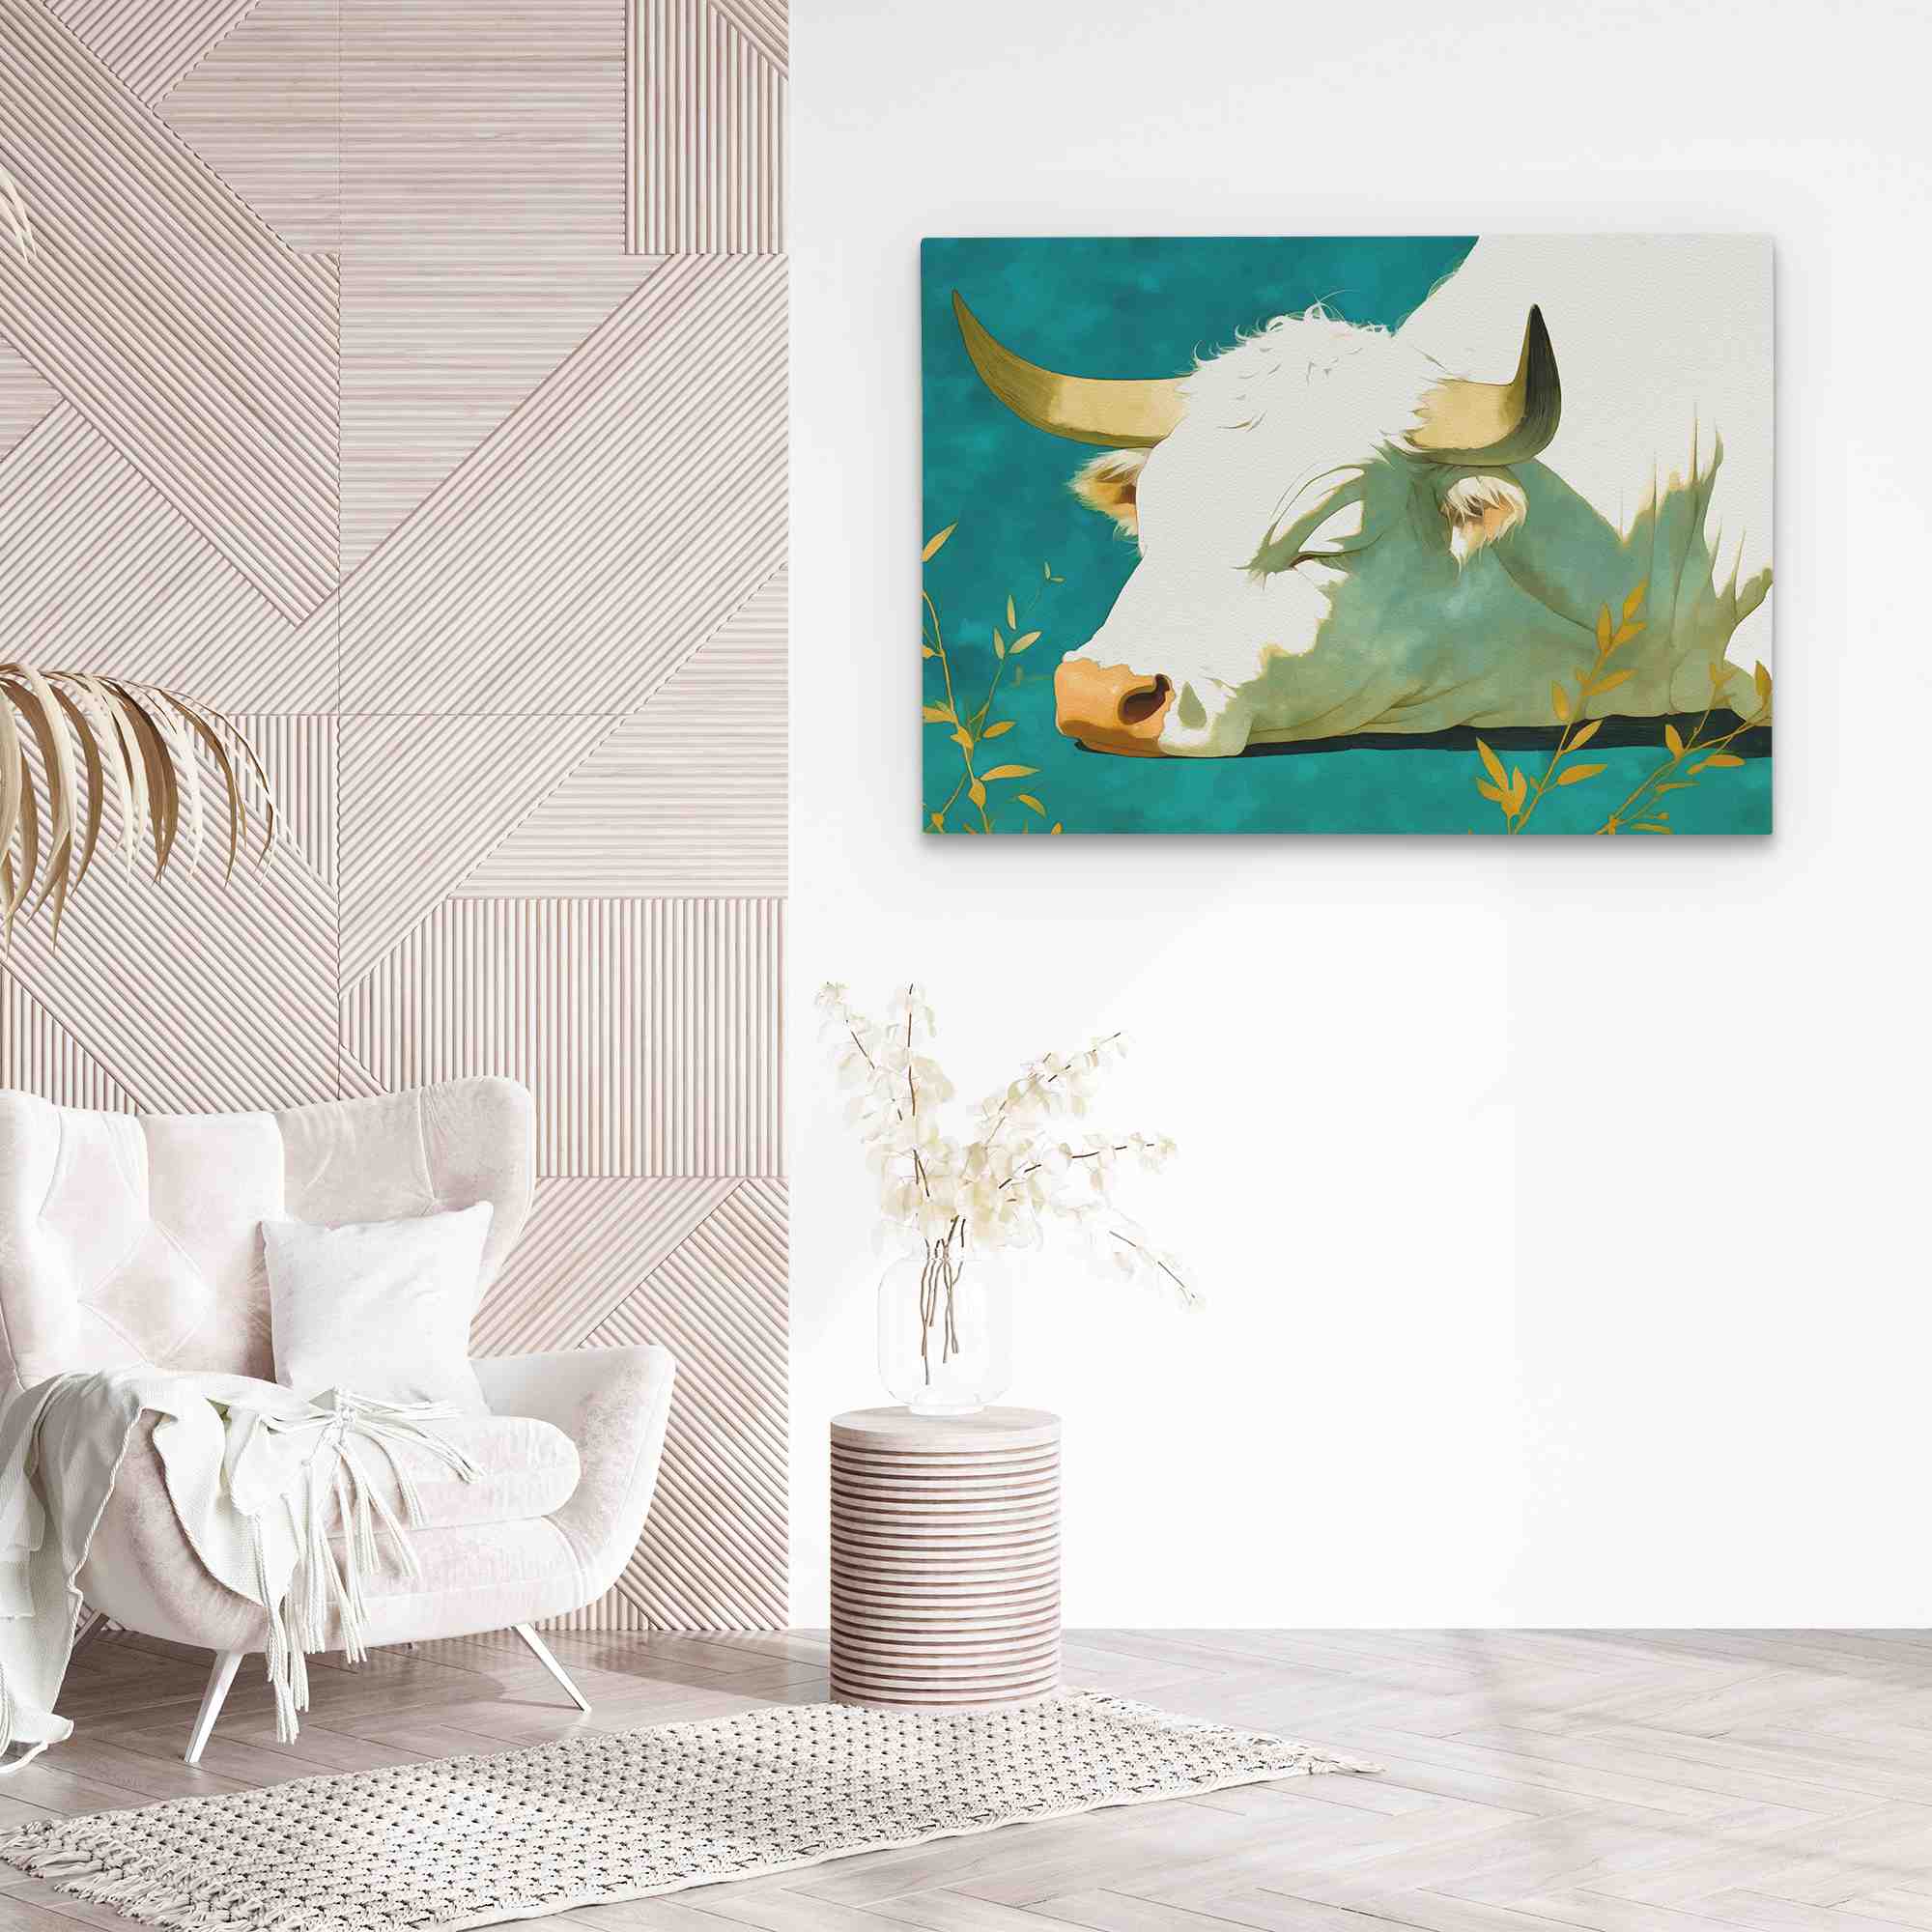 a painting of a white cow with yellow horns